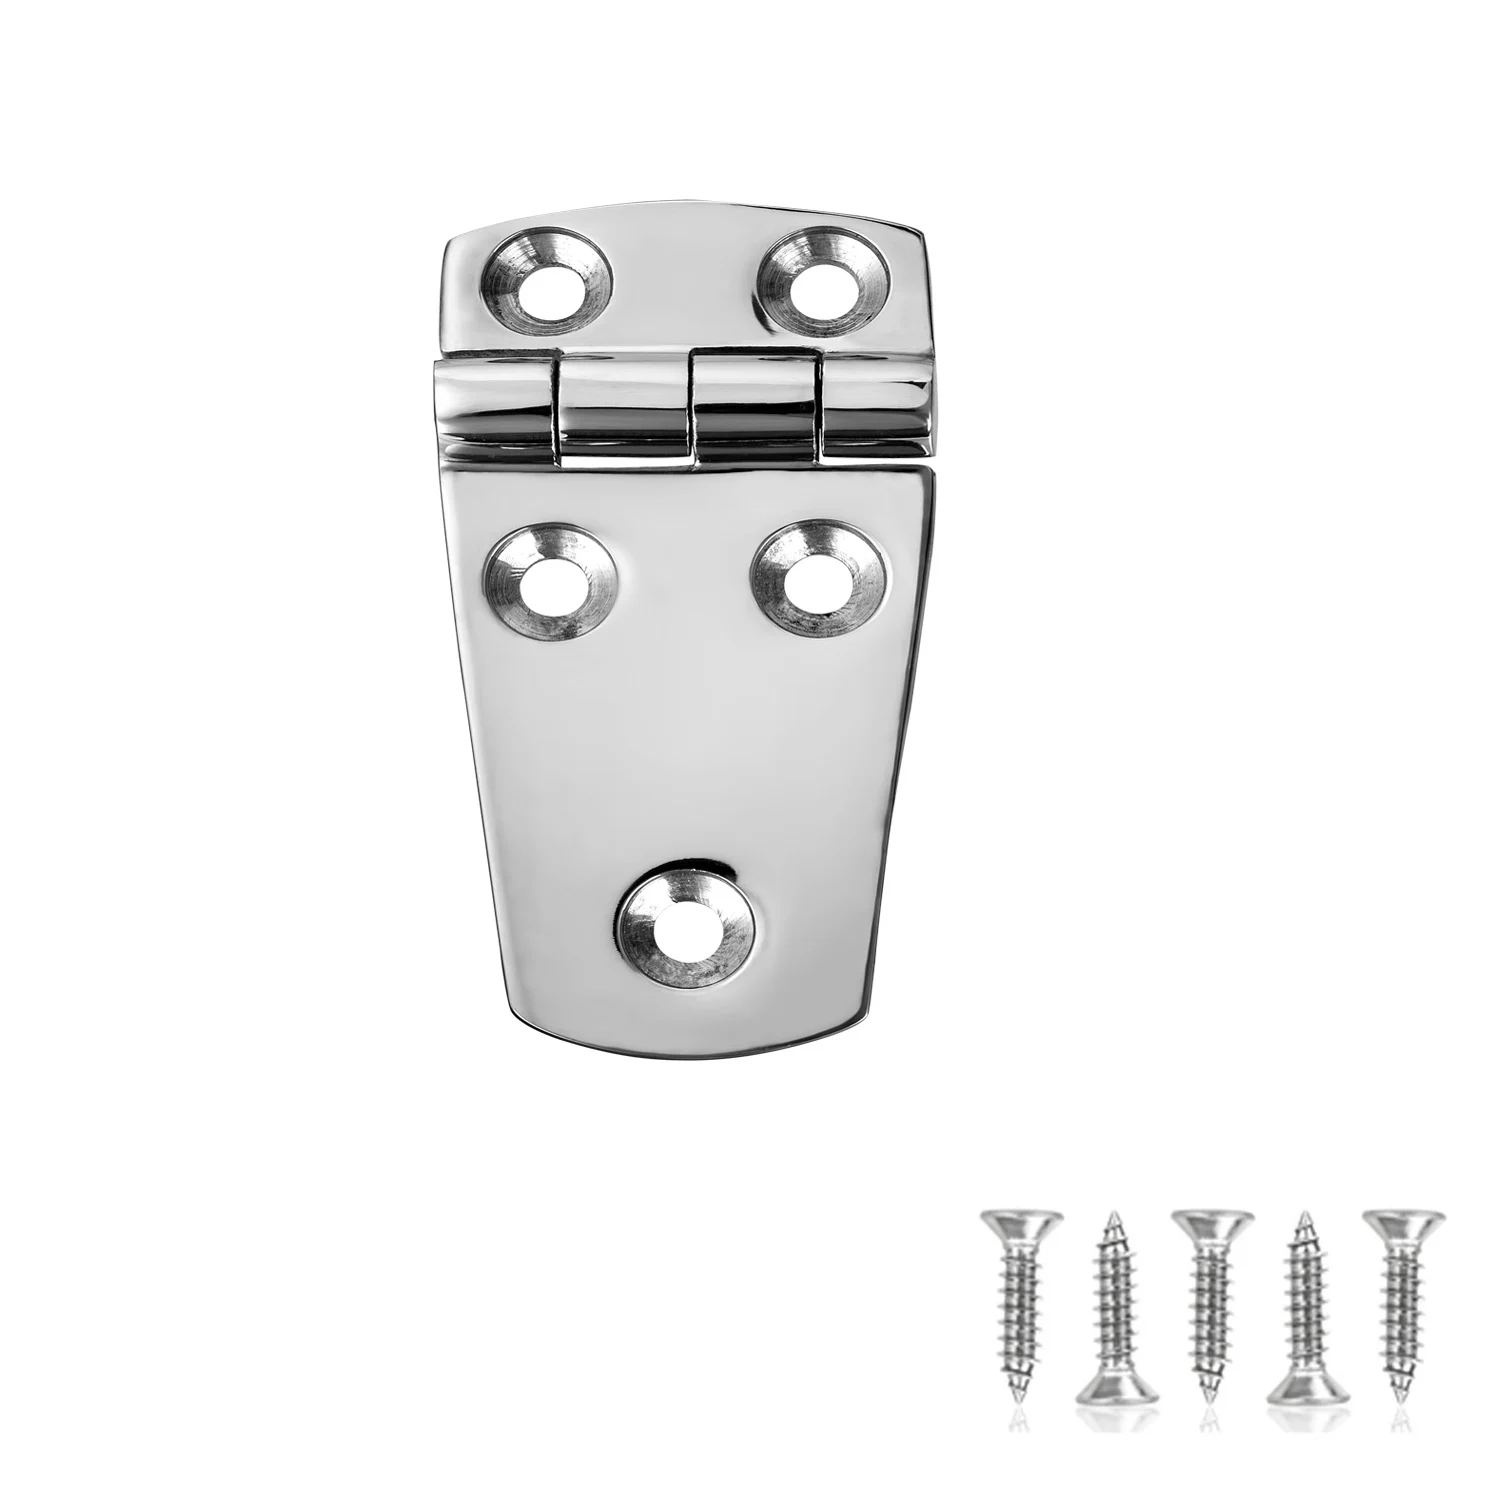 Marine Boat Hatch Hinges Stainless Steel, 3 Inch X 1.5 Inches(76 X 38MM) 5 Holes, No Noise, Heavy Duty 316 Ss with Screws 4pc antique crown head hinges with screws 6 holes jewelry gift vintage wooden box cabinet decoration hinge hardware accessories